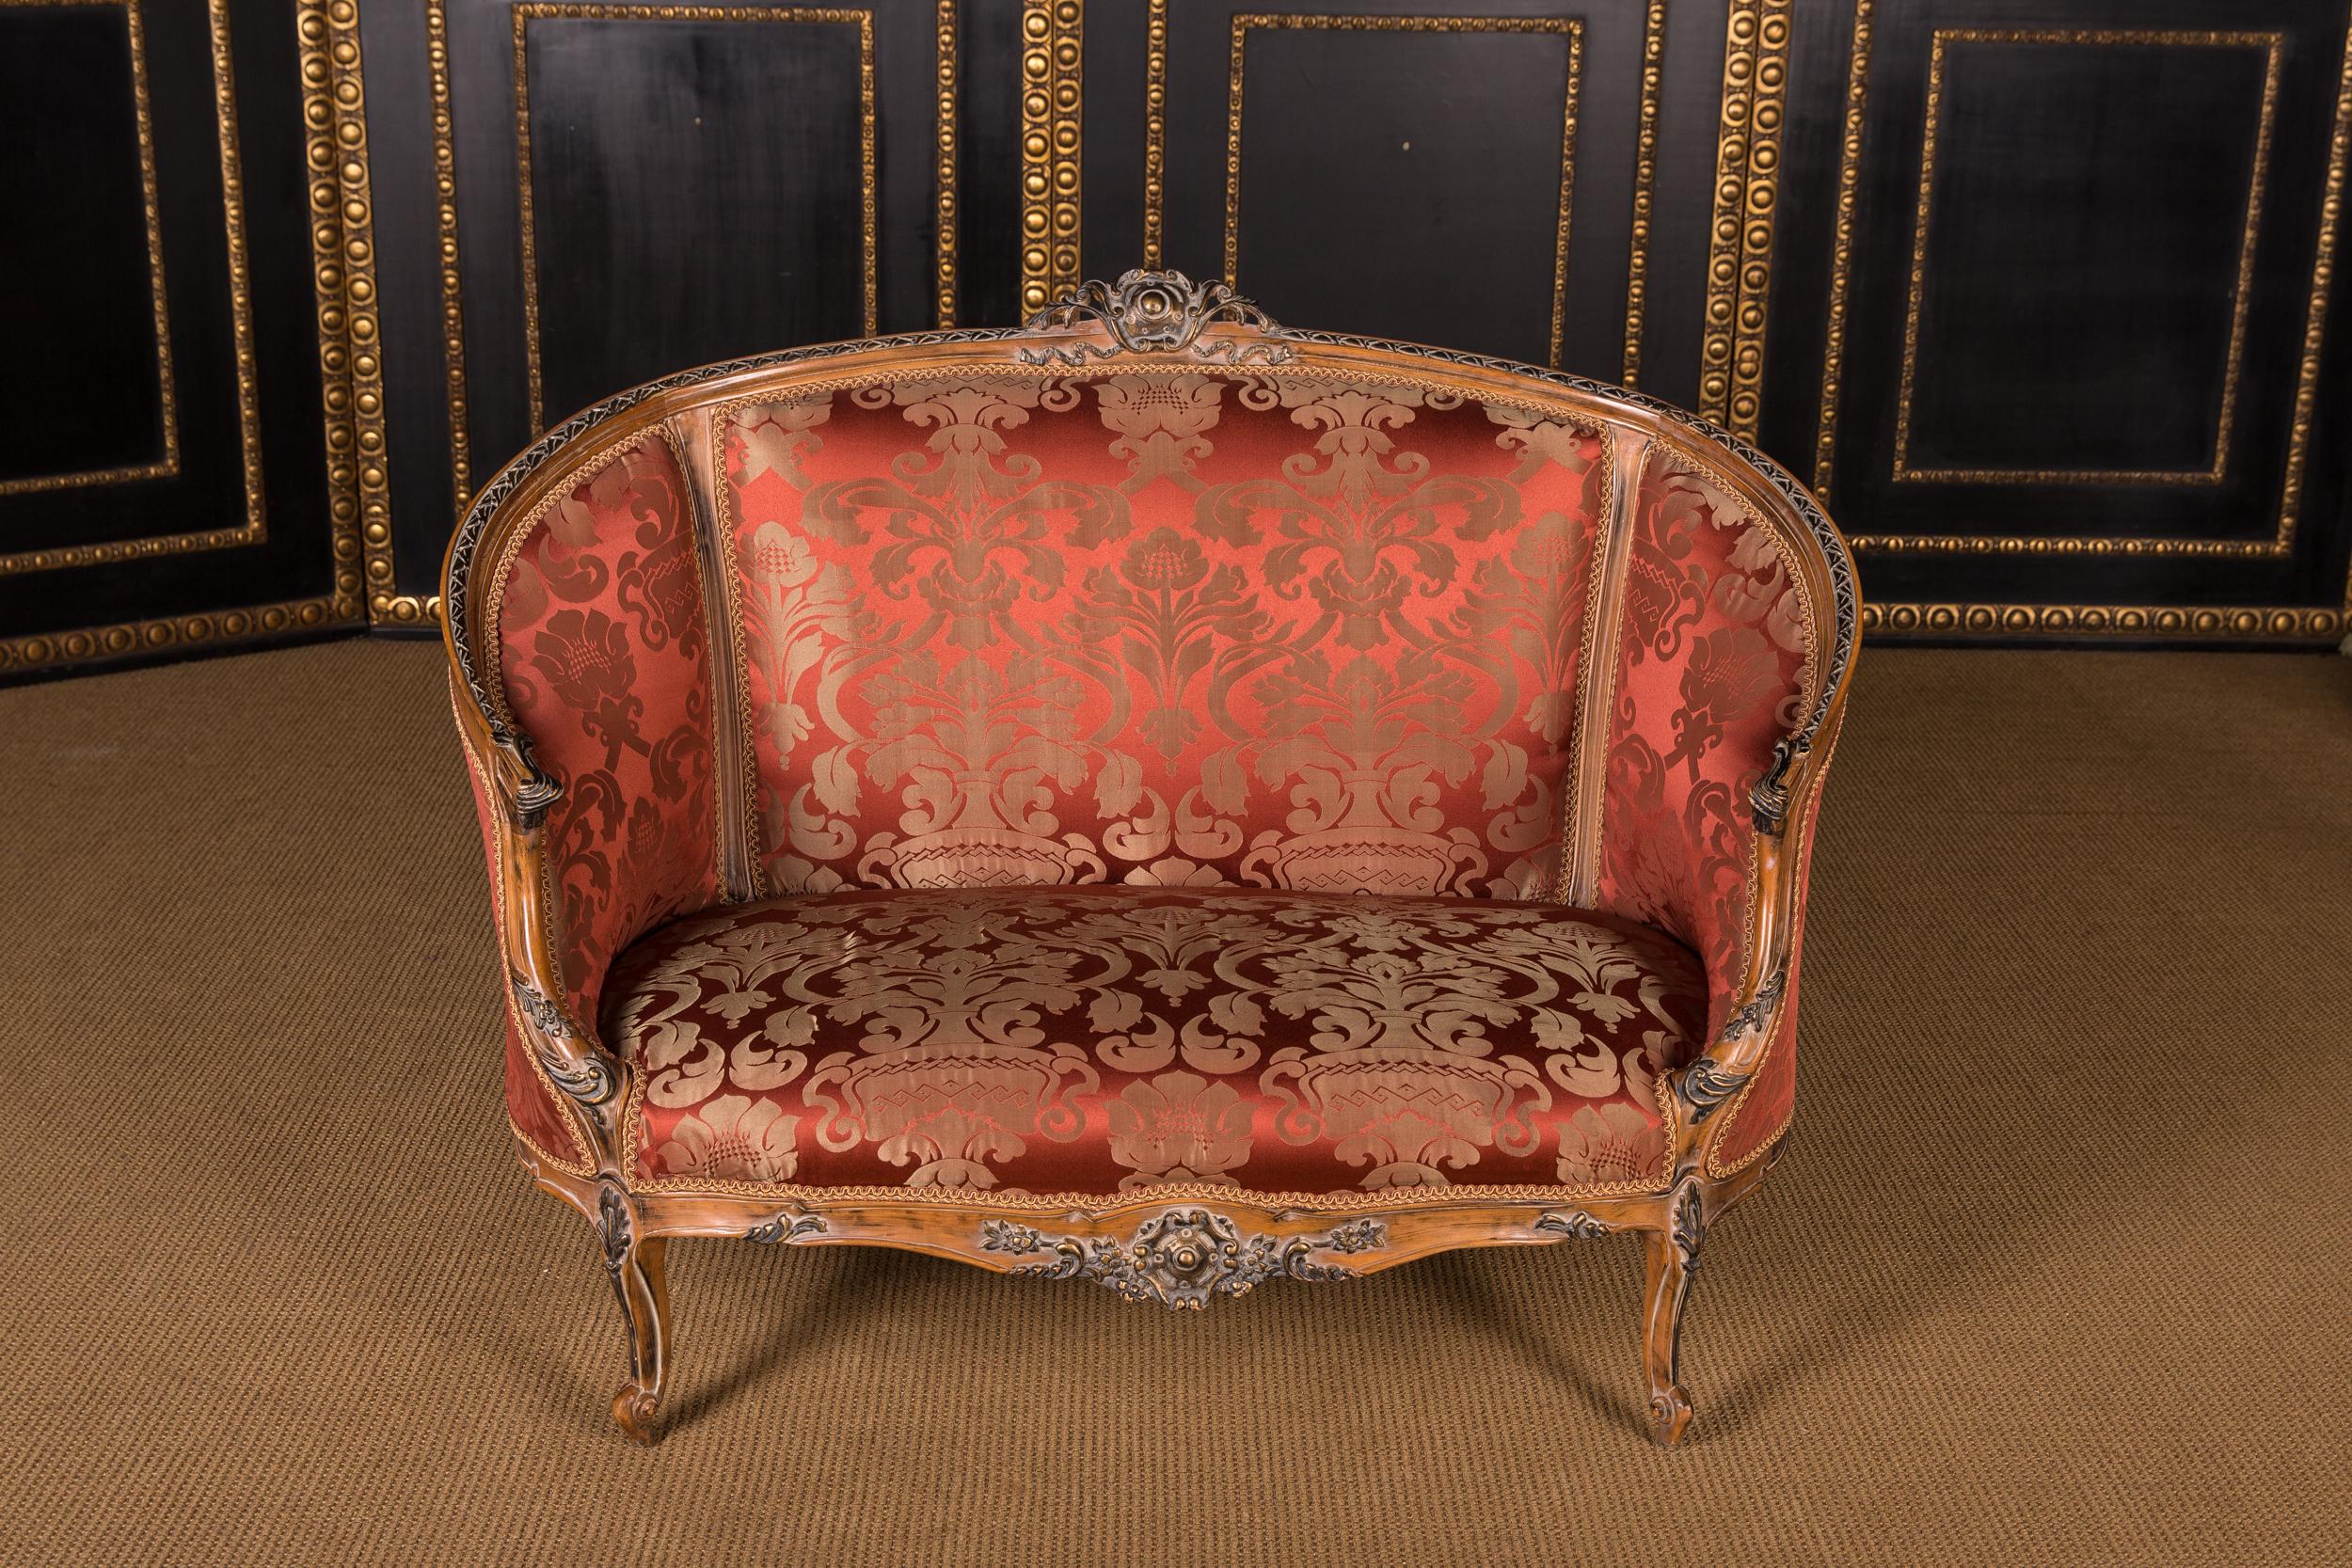 Solid beechwood, carved and painted. Semi circular rising backrest frame with openwork rocaille crowning. Appropriately curved frame with rich relief carved foliage. Slightly curved frame on curly legs. Seat and backrest are finished with a